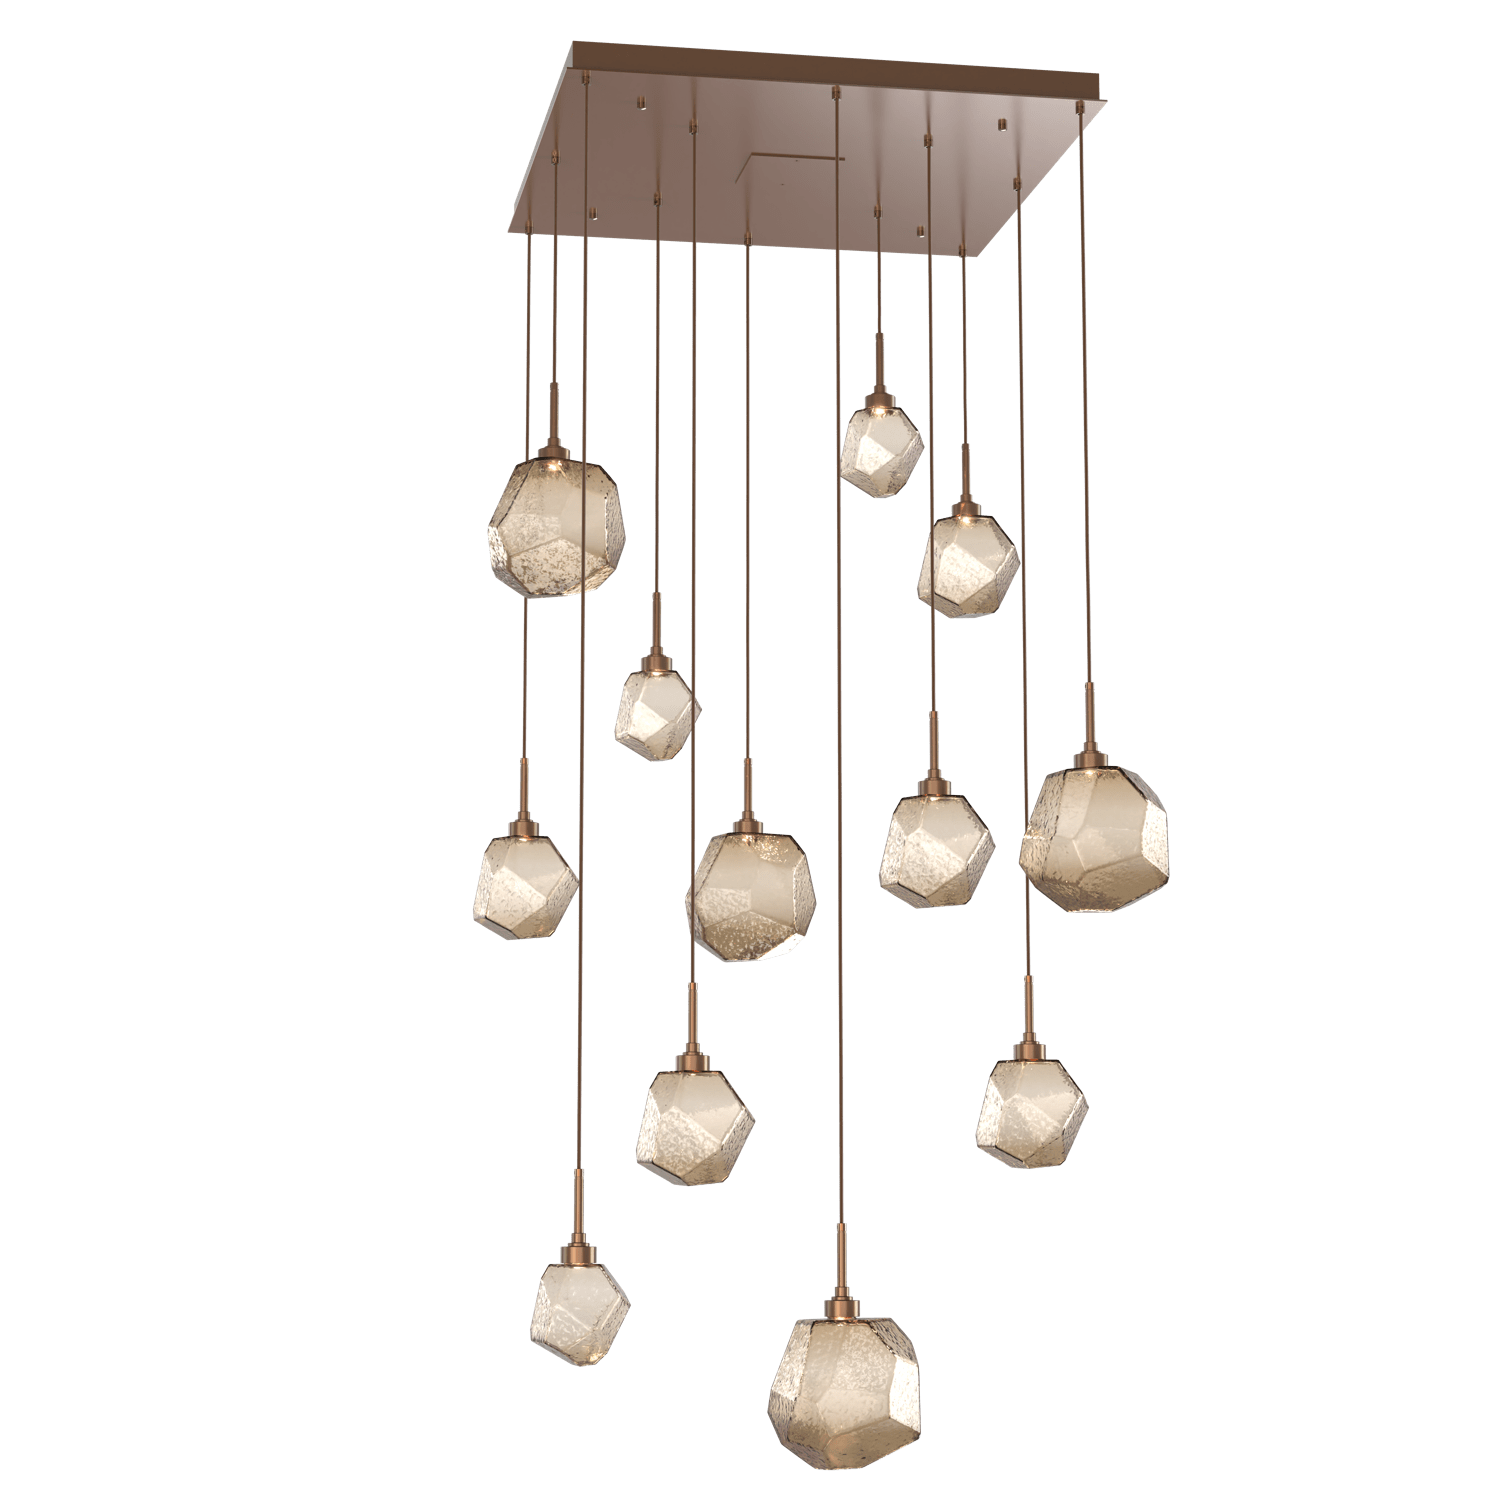 CHB0039-12-BB-B-Hammerton-Studio-Gem-12-light-square-pendant-chandelier-with-burnished-bronze-finish-and-bronze-blown-glass-shades-and-LED-lamping